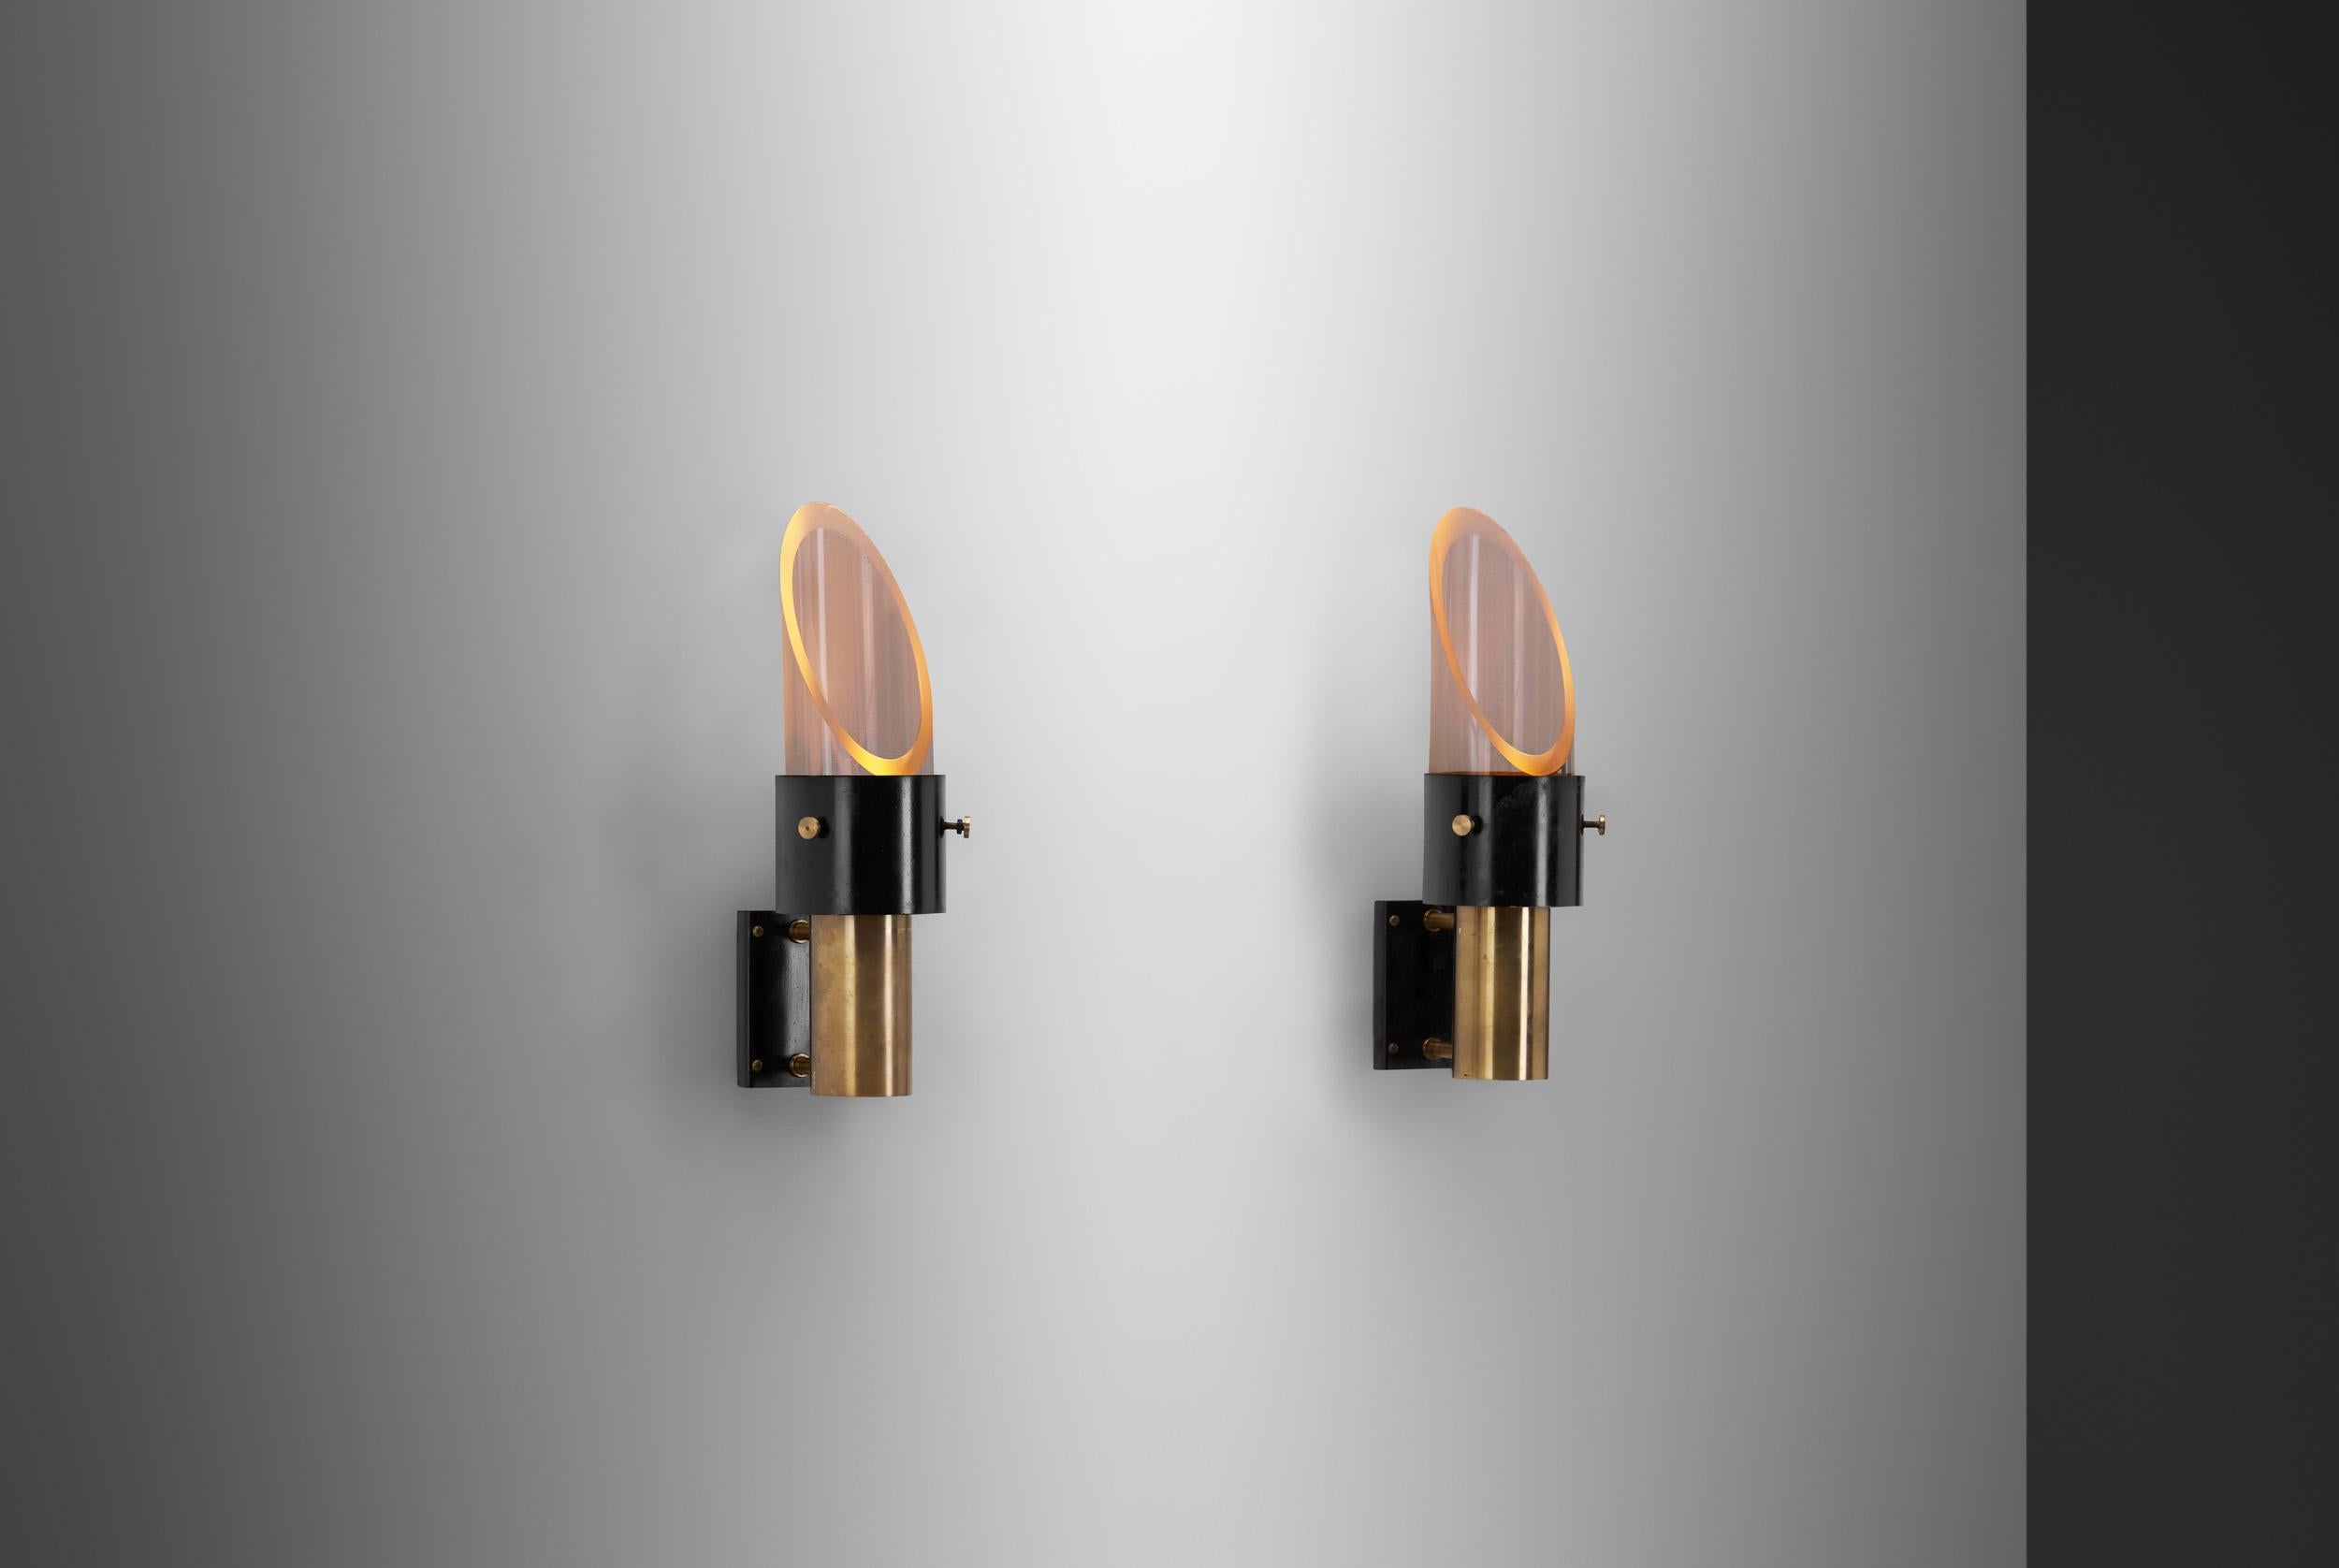 These Lyfa-edition “Saga” wall sconces by Danish architect and designer, Kay Kørbing are true collectors’ pieces. By the 1950s, Lyfa had built an international reputation for original, high-quality, modernist lamps. In the postwar era, the company